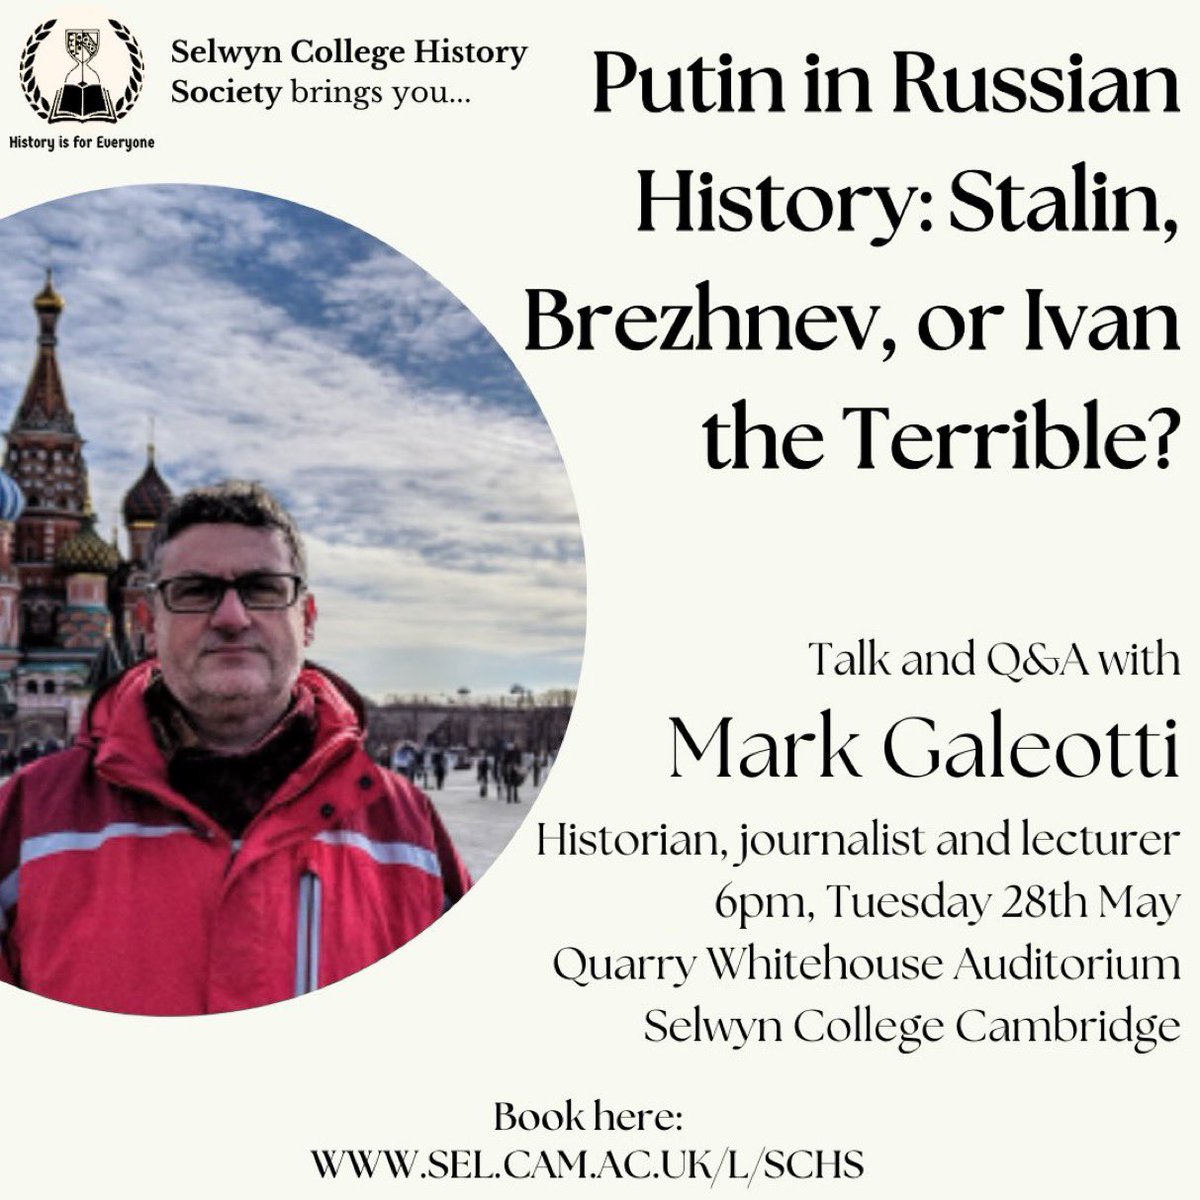 We’re looking forward to @MarkGaleotti talking at Selwyn tonight about Putin and Russian history. The event is fully booked in person, but everyone is welcome to join us online from 6pm BST: youtube.com/live/cdY0Ndf_C…